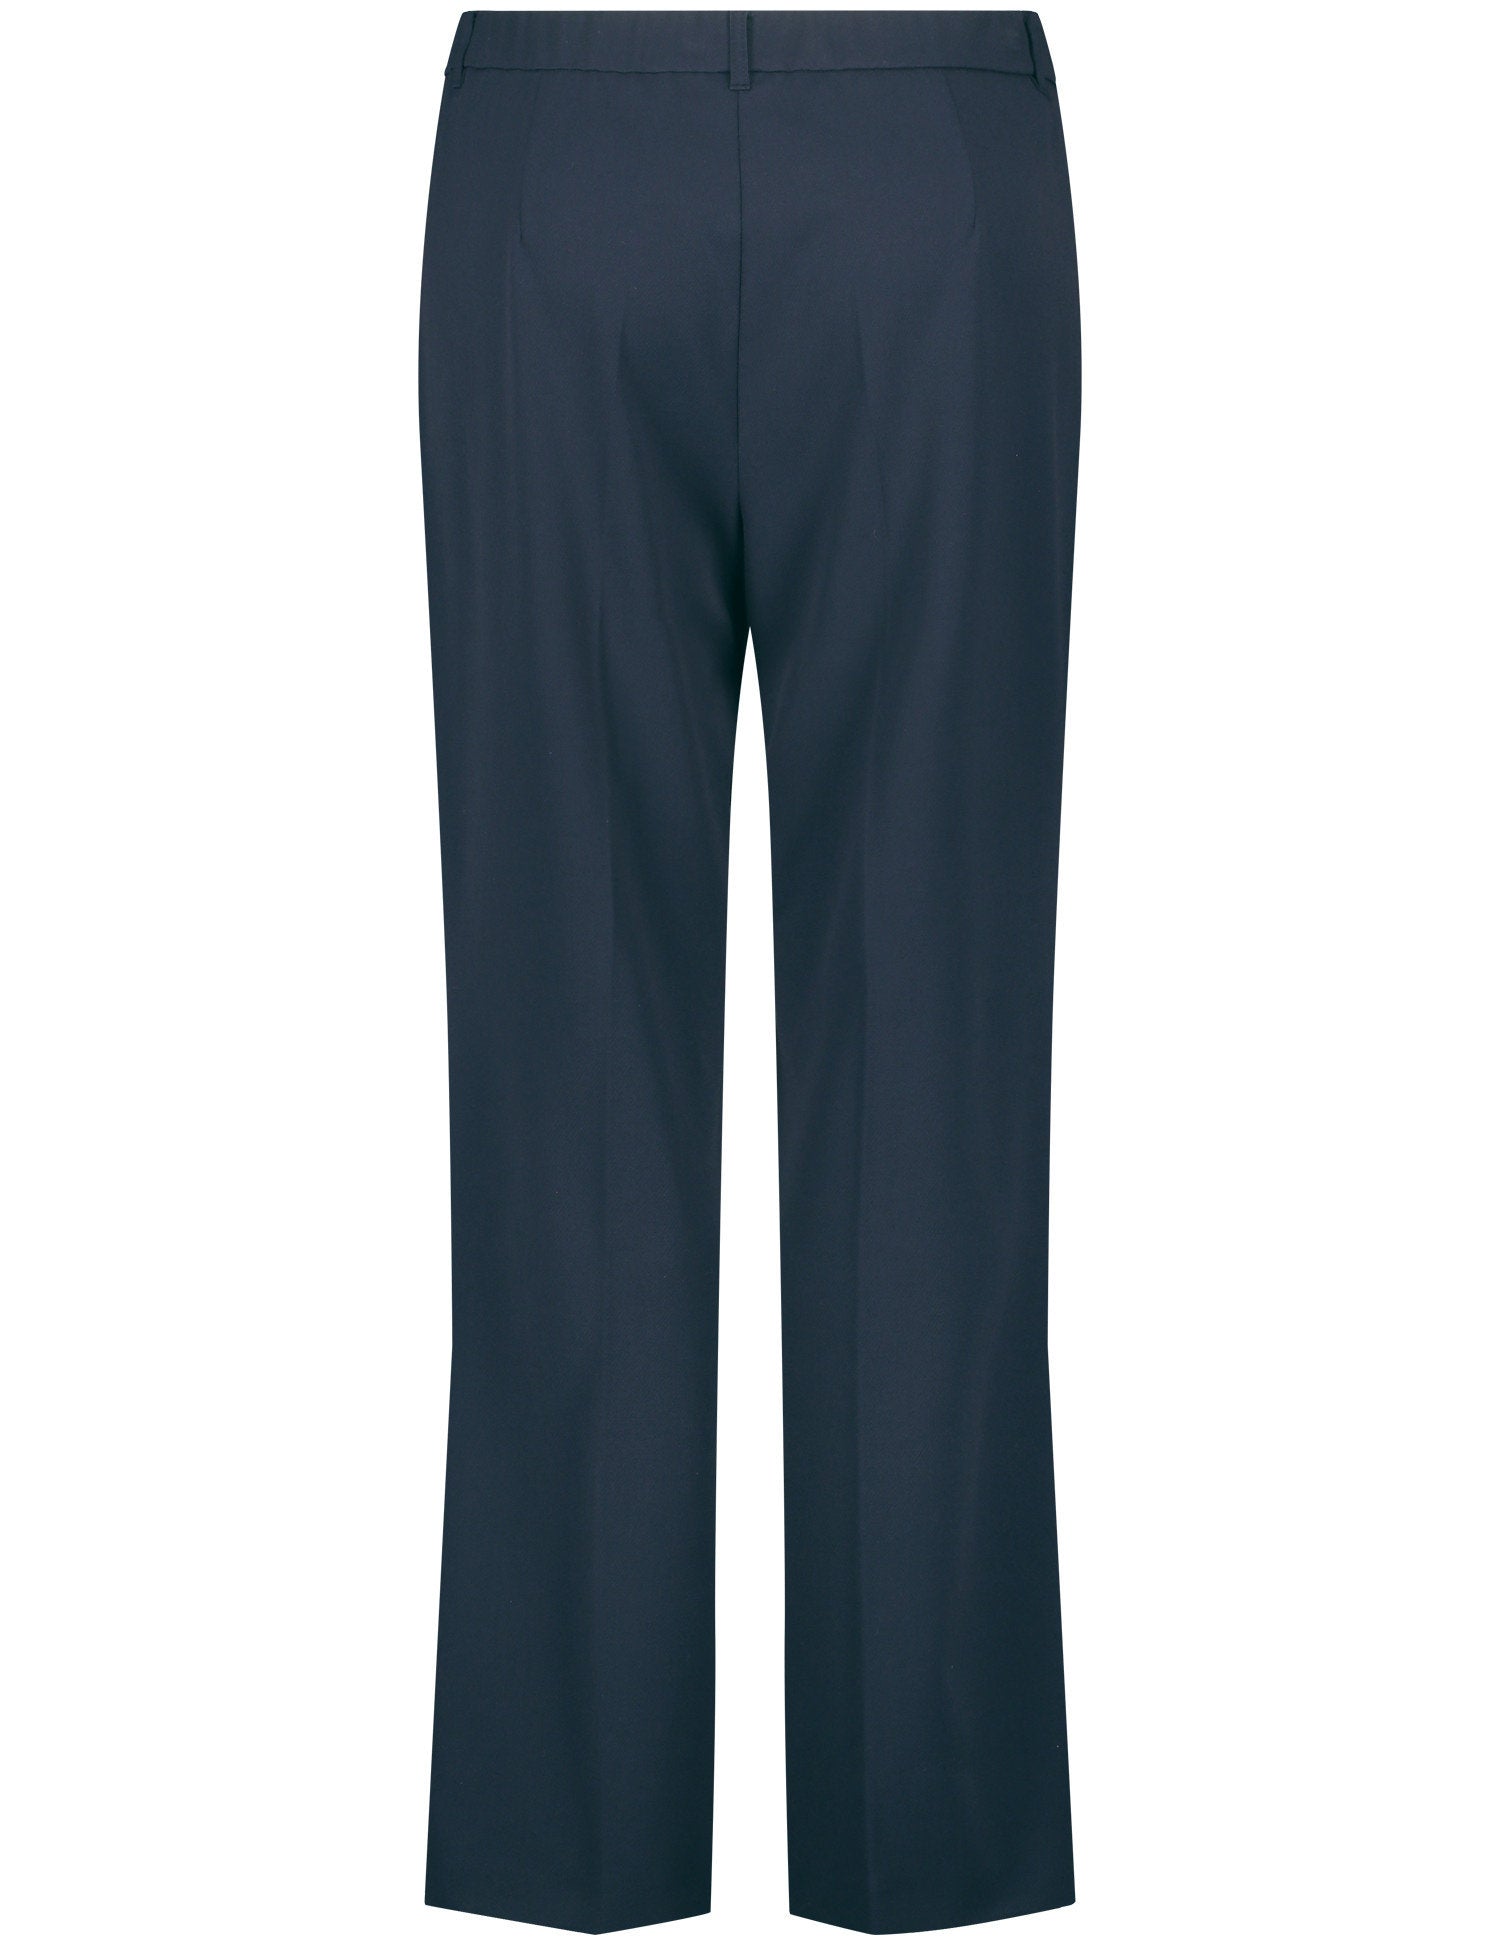 Smart Trousers With A Wide Leg Greta_320222-21321_8450_03